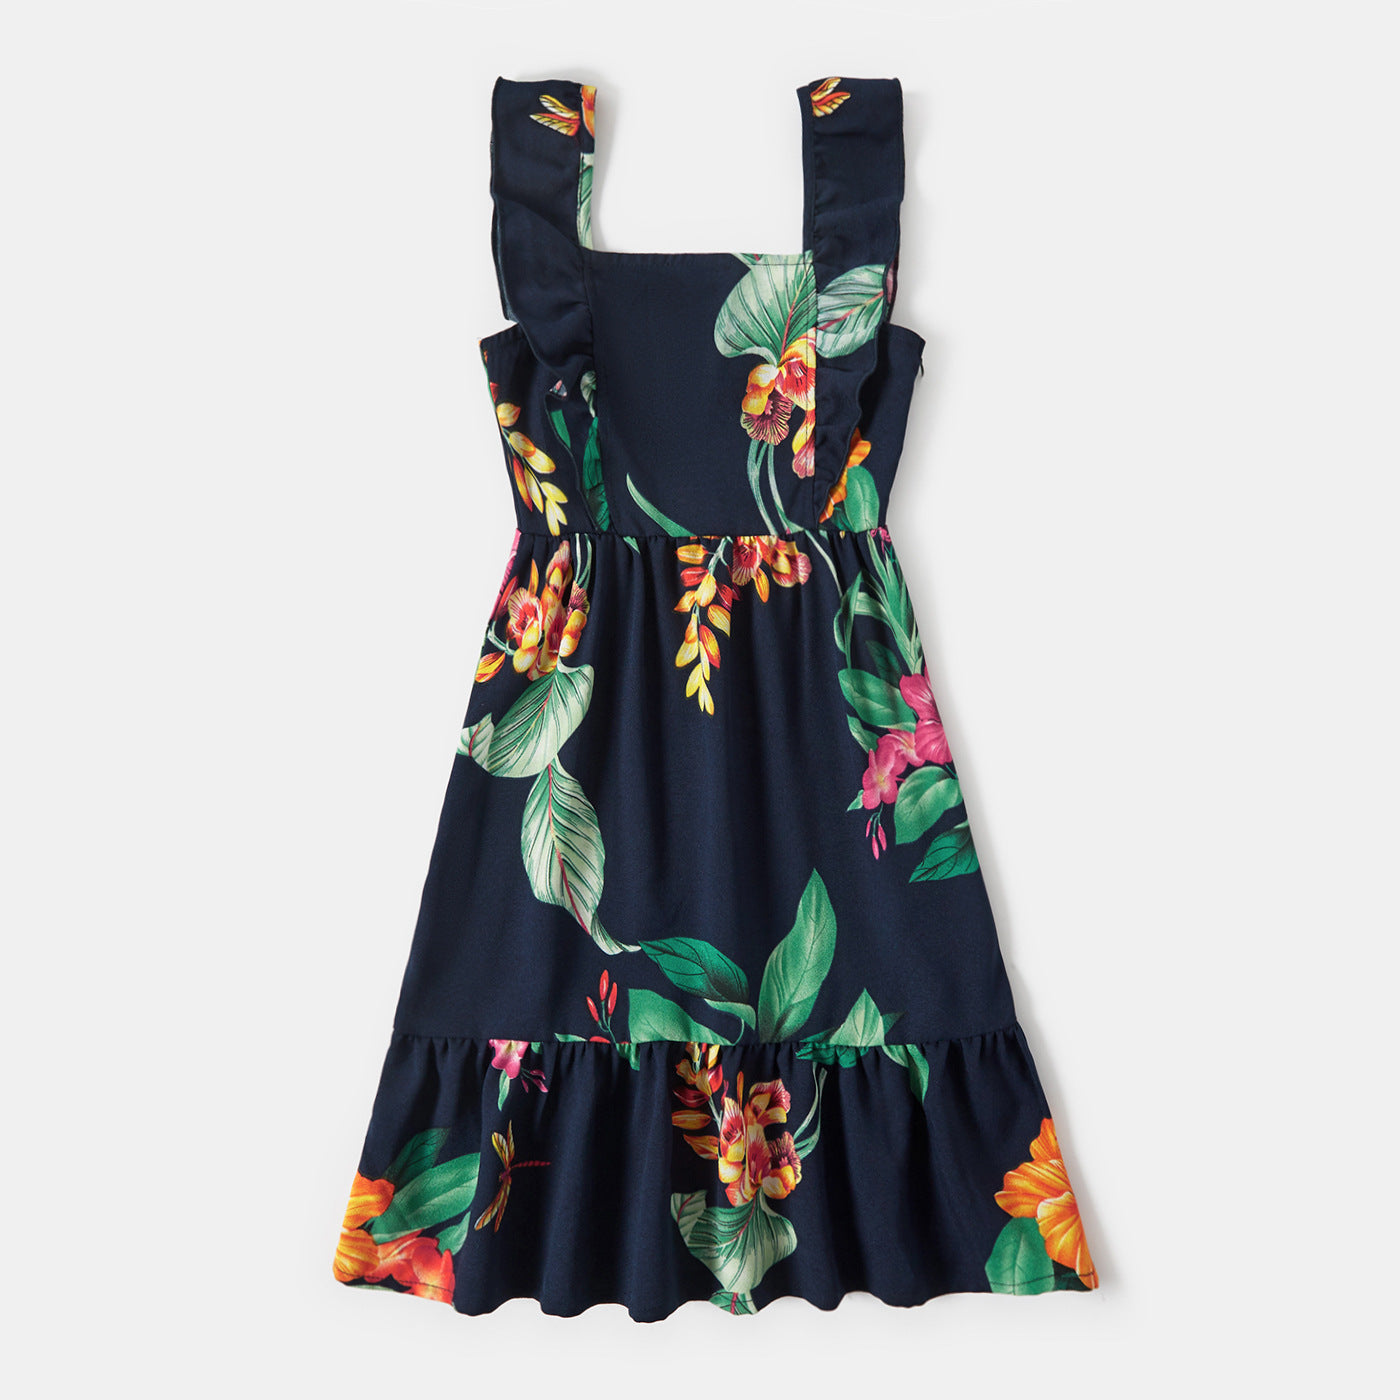 Family Matching All Over Floral Print Ruffle Deep V Neck Sleeveless Dresses and T-shirts Sets